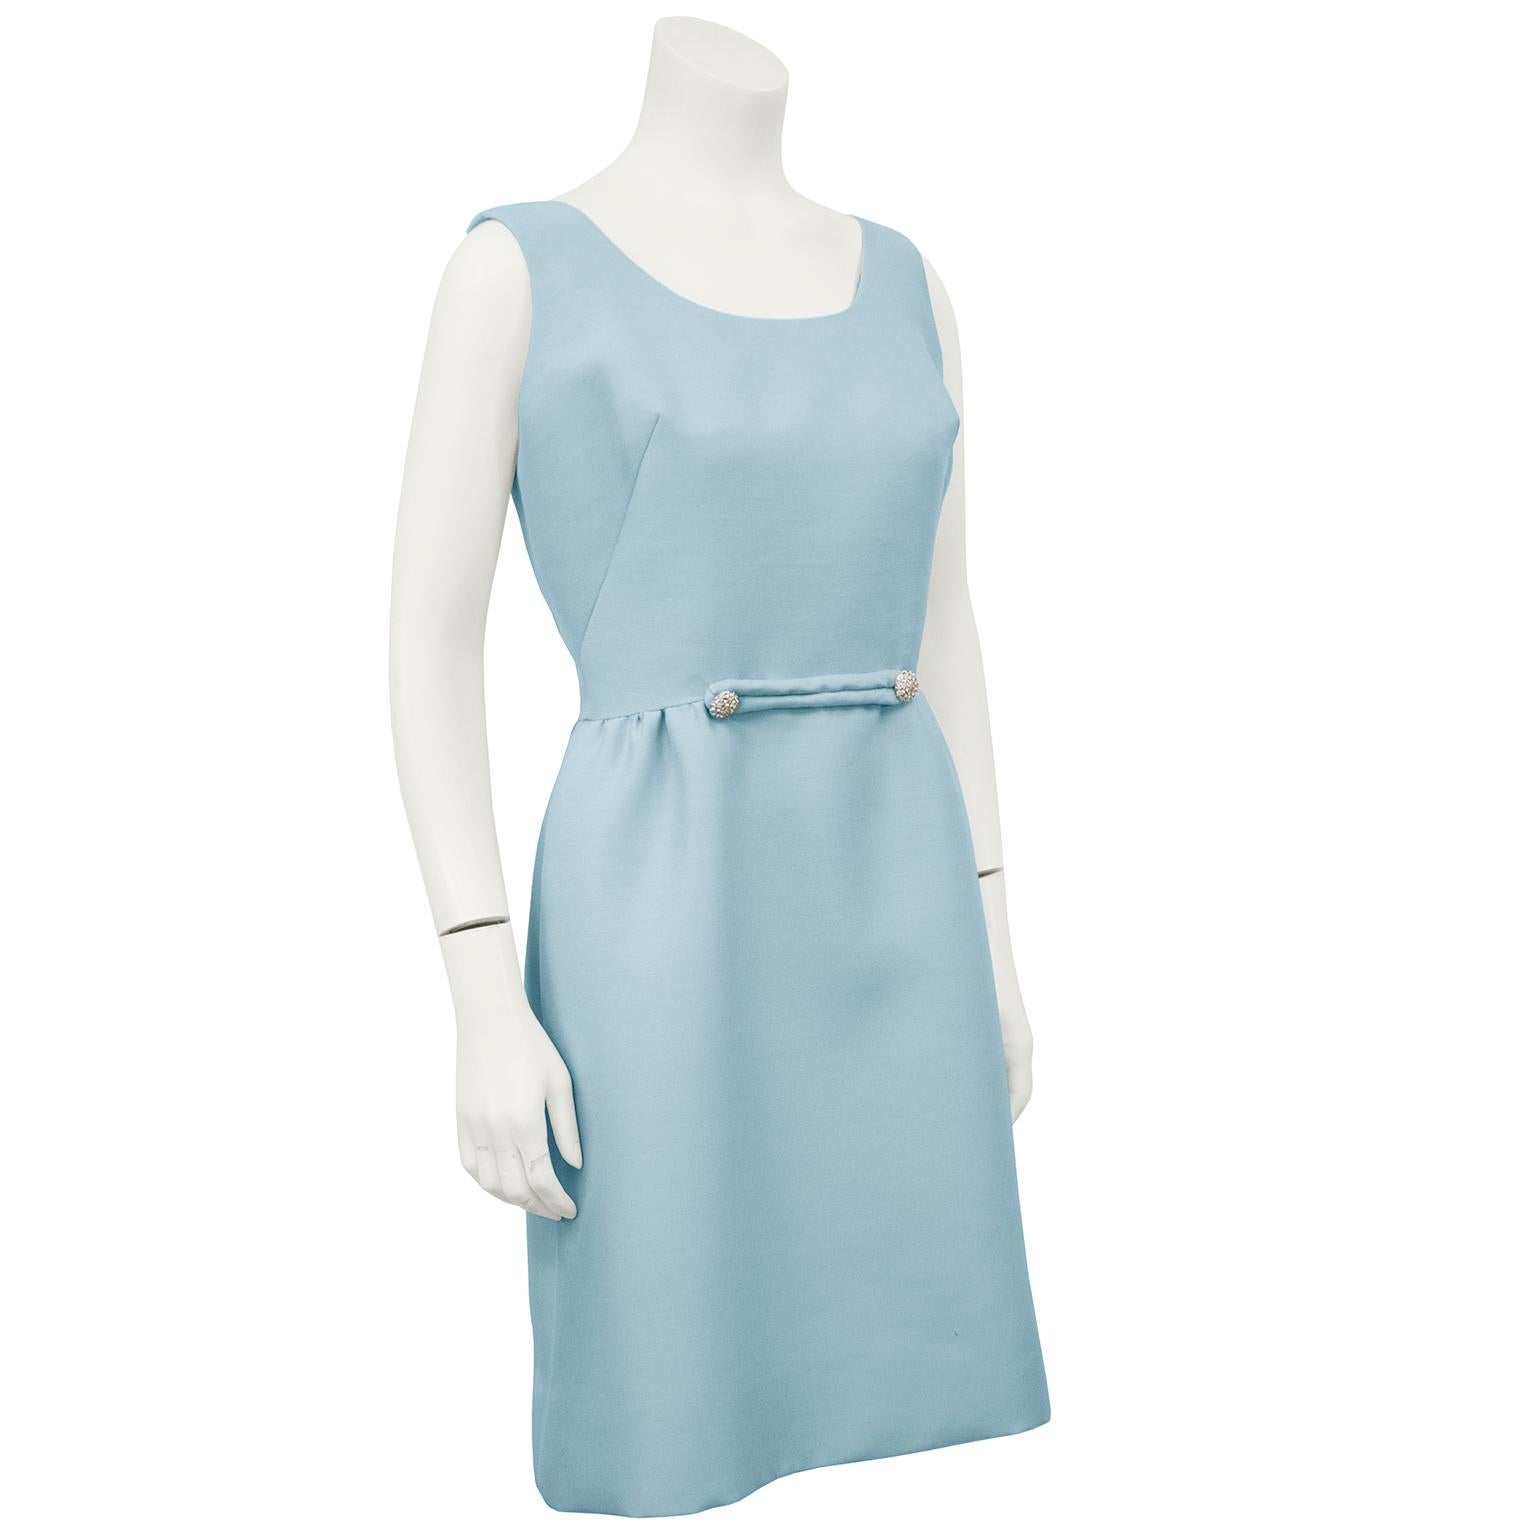 Robin's egg blue cocktail dress from the 1960s. Classic shape is finished with a simple belt accent at the natural waist with two rhinestone buttons. Darts at the bust, zipper up the back. Fully lined, fits like a US 4-6. In excellent condition. 